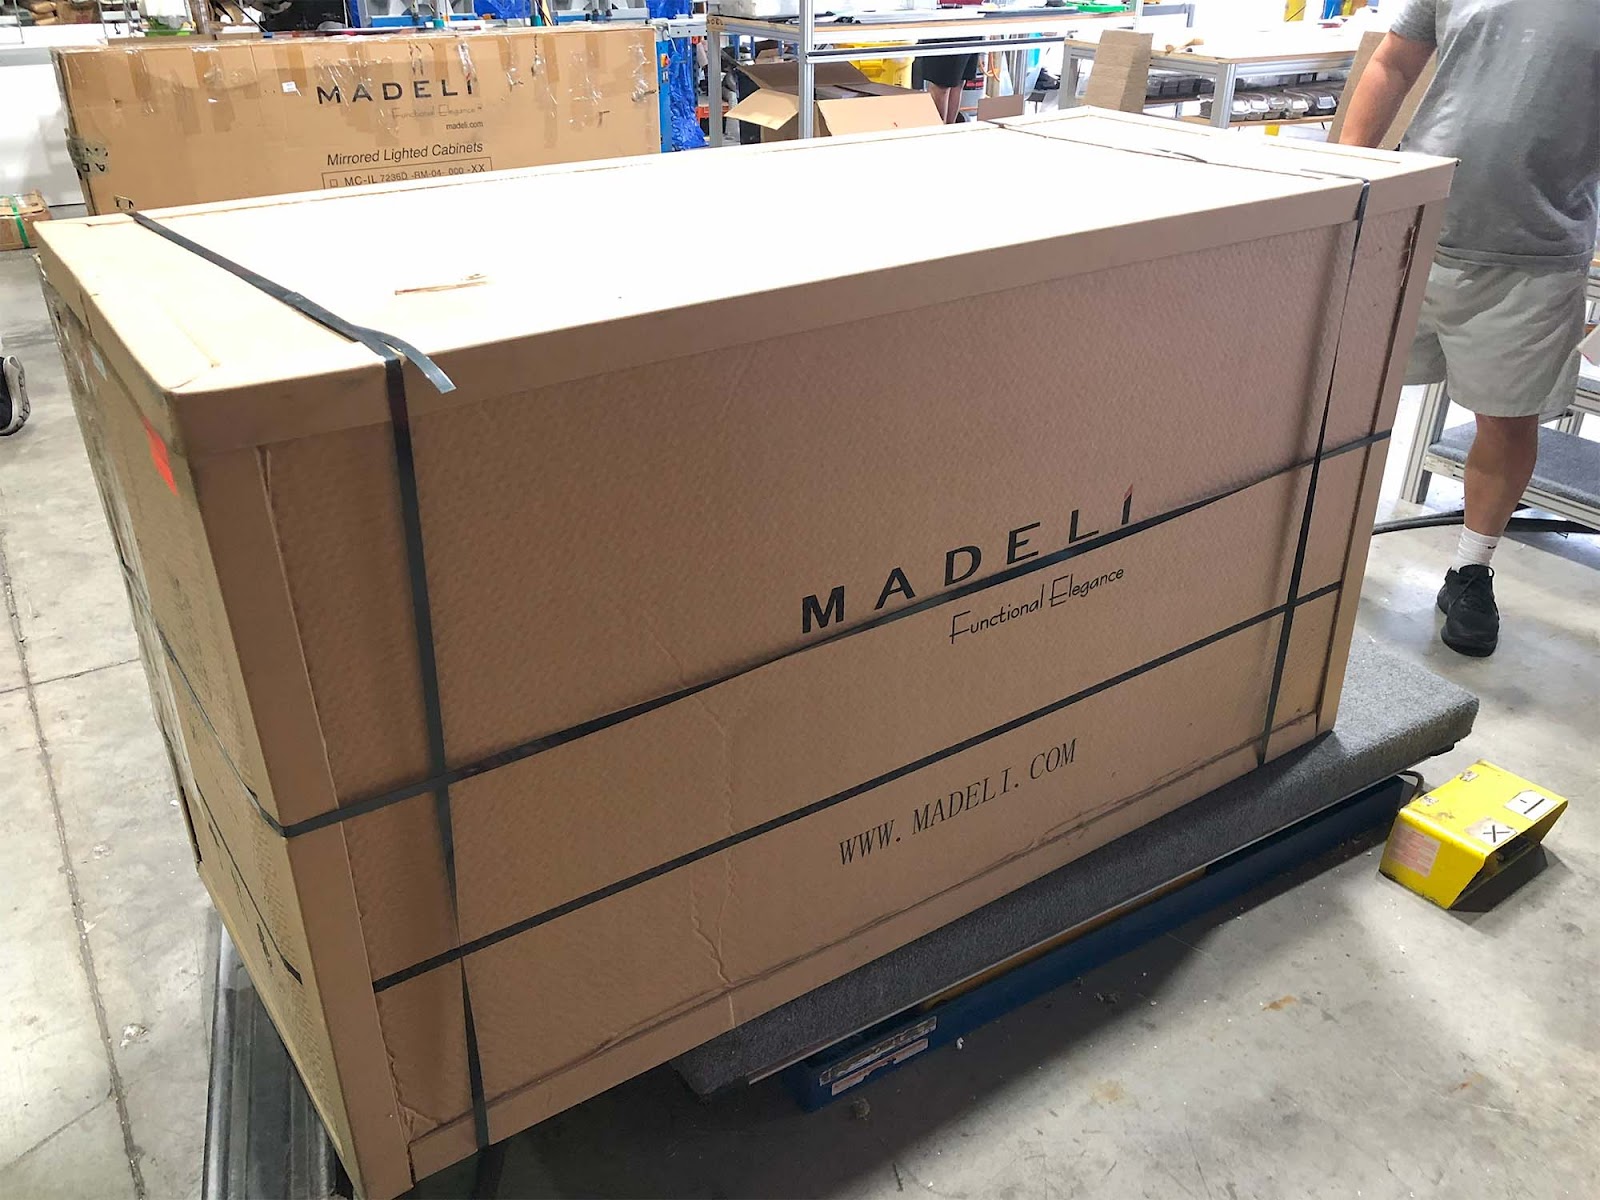 How Madeli’s Durable Packaging Ensures Flawless Product Delivery